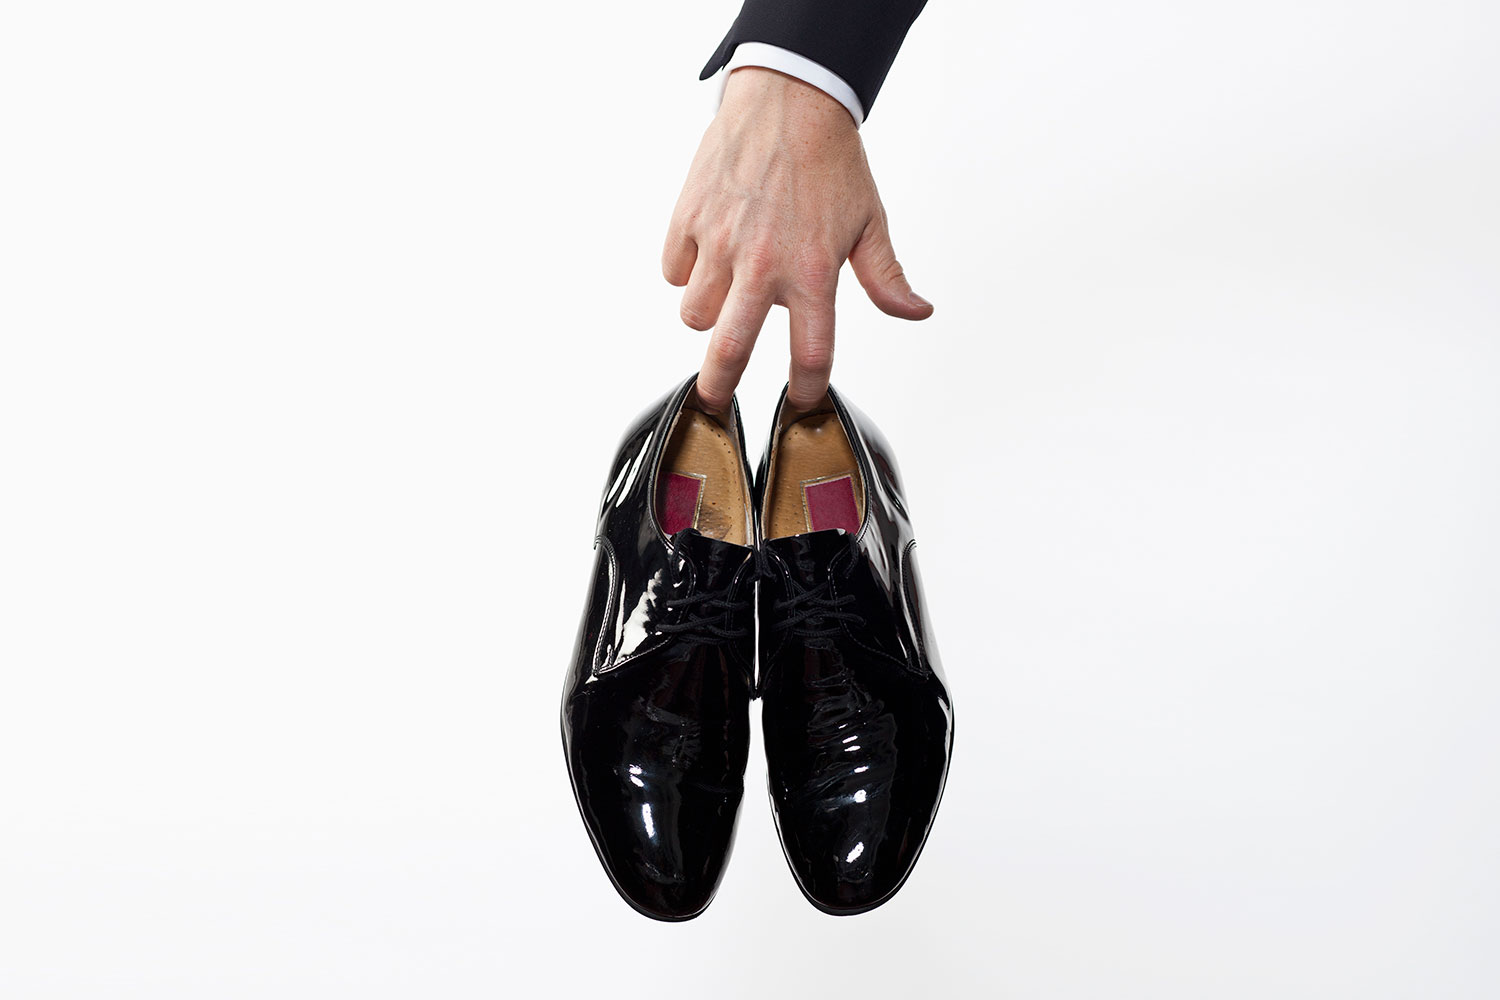 5 most expensive men's formal shoes